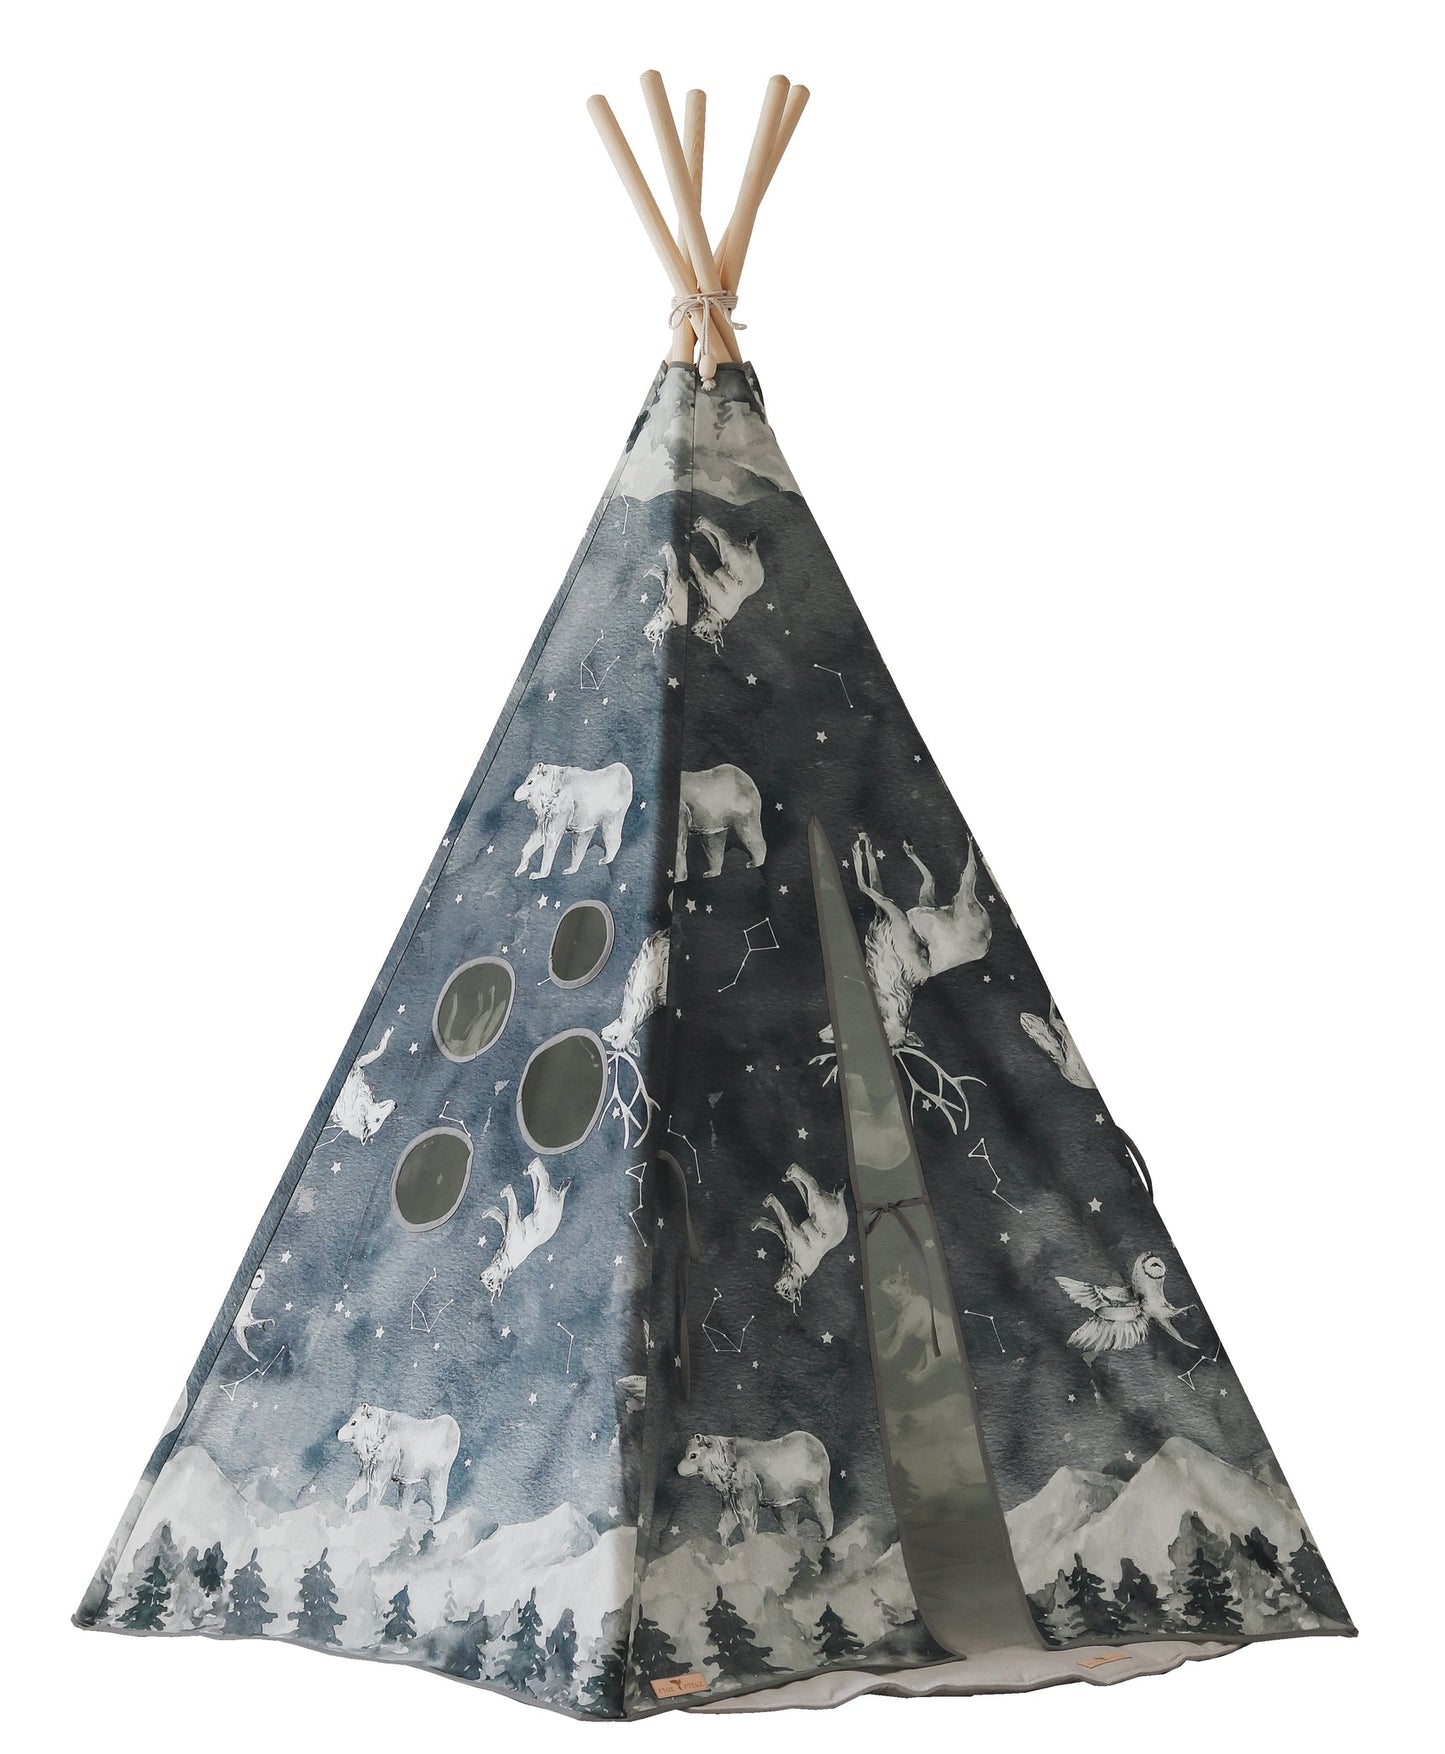 “Night Sky” Teepee and "White and Grey" Leaf Mat Set